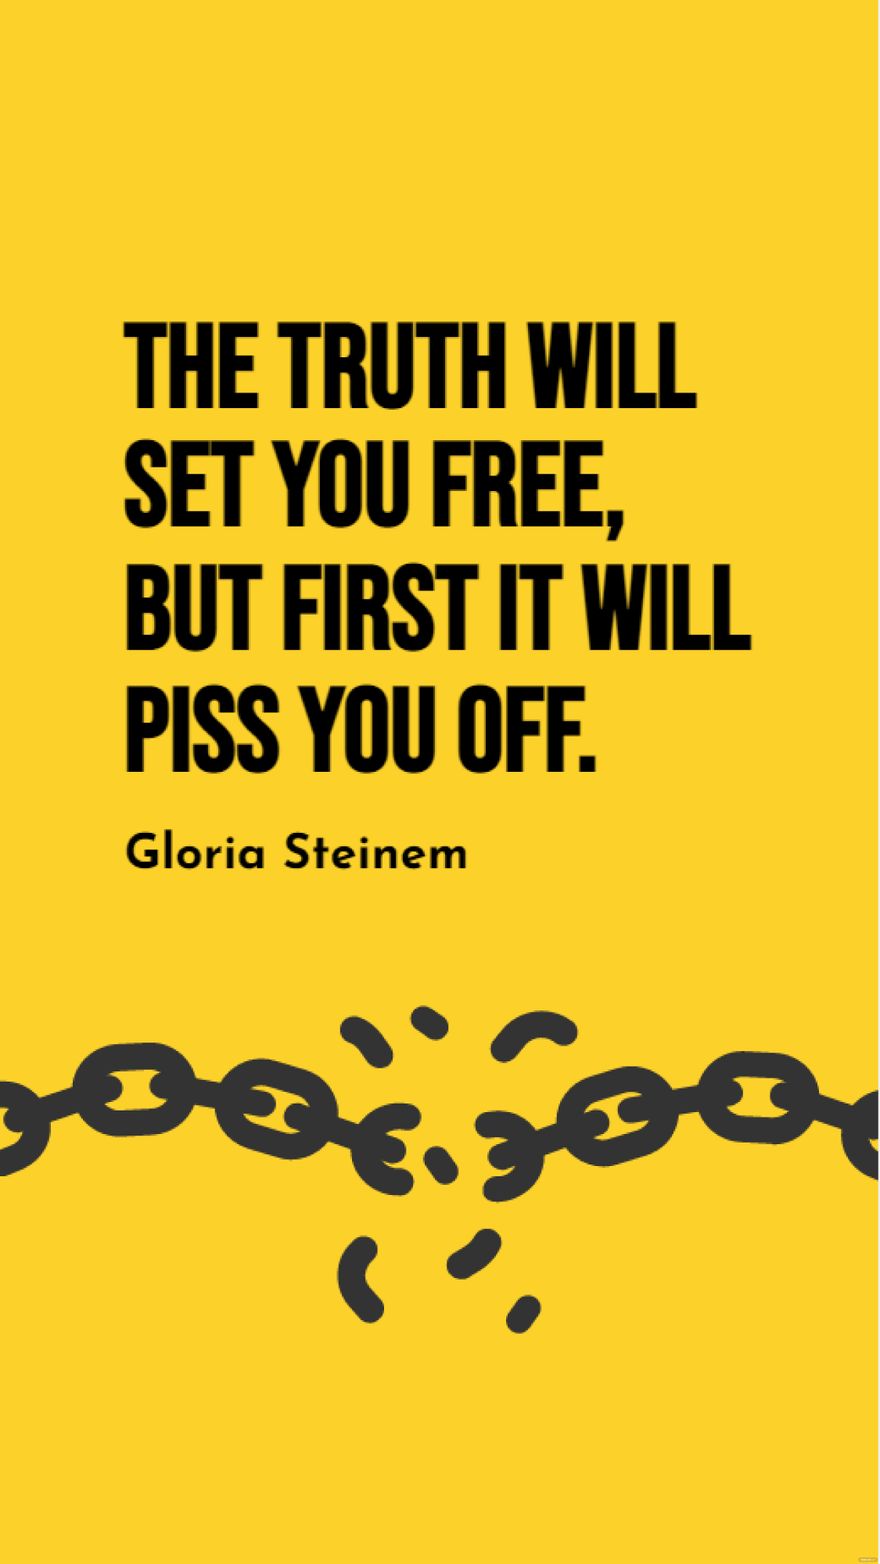 Gloria Steinem - The truth will set you free, but first it will piss you off. in JPG